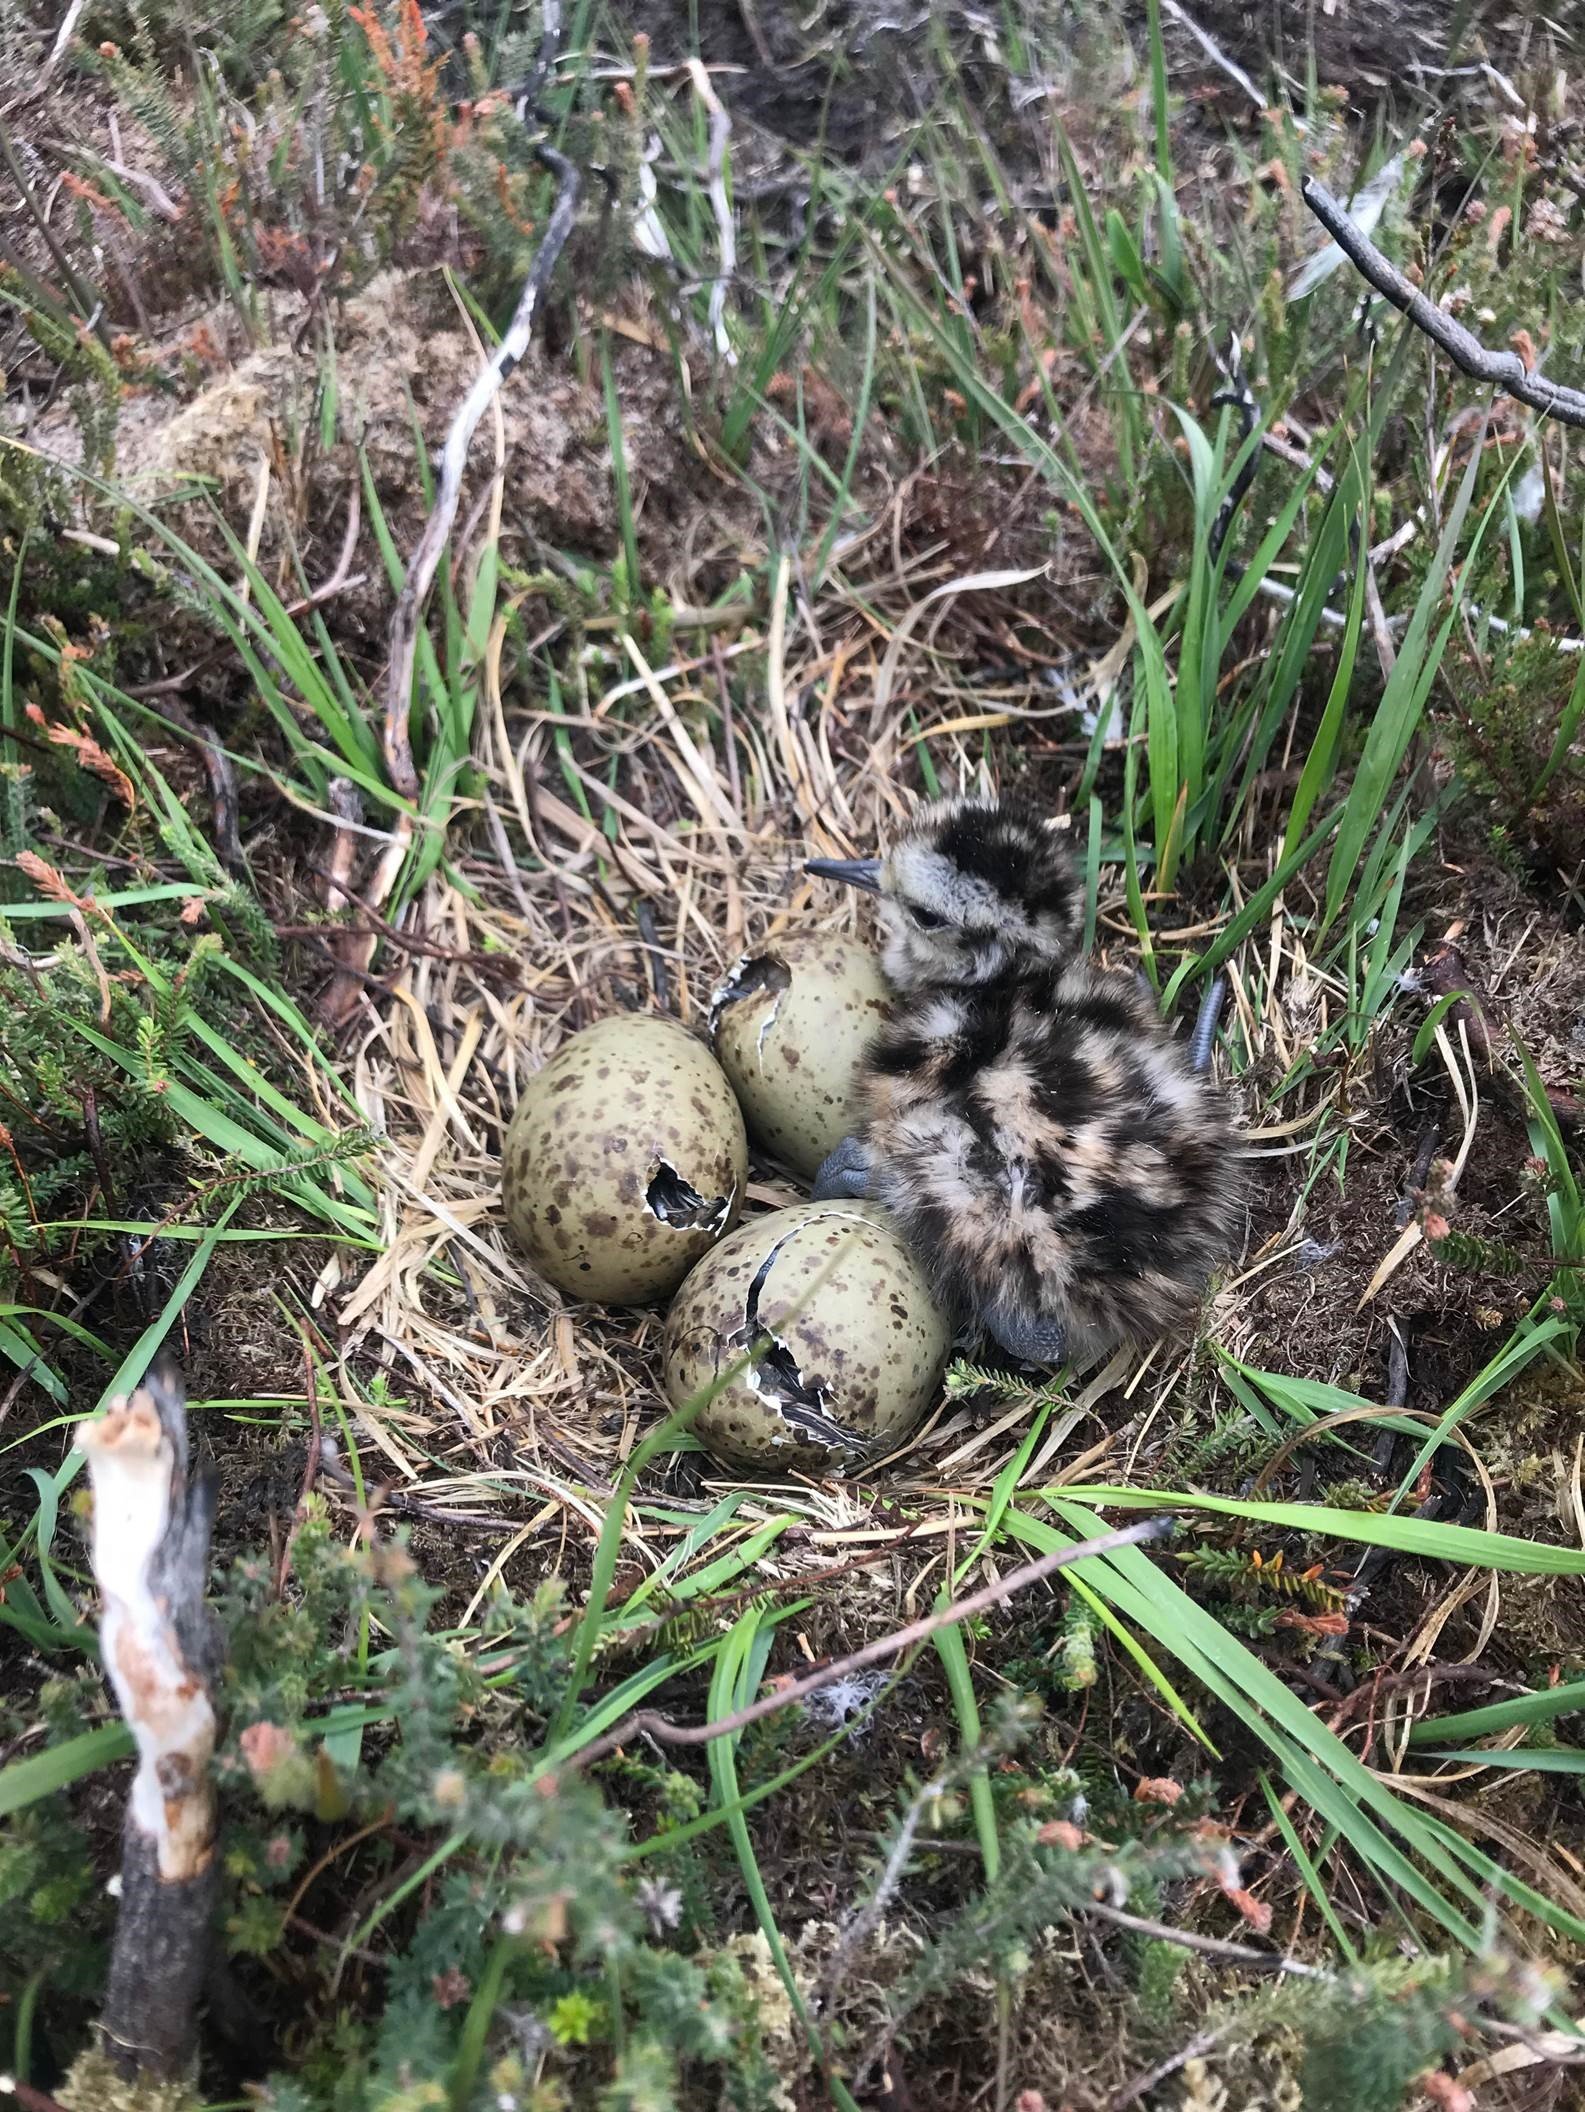 Curlew chicks hatching credit Elli Rivers